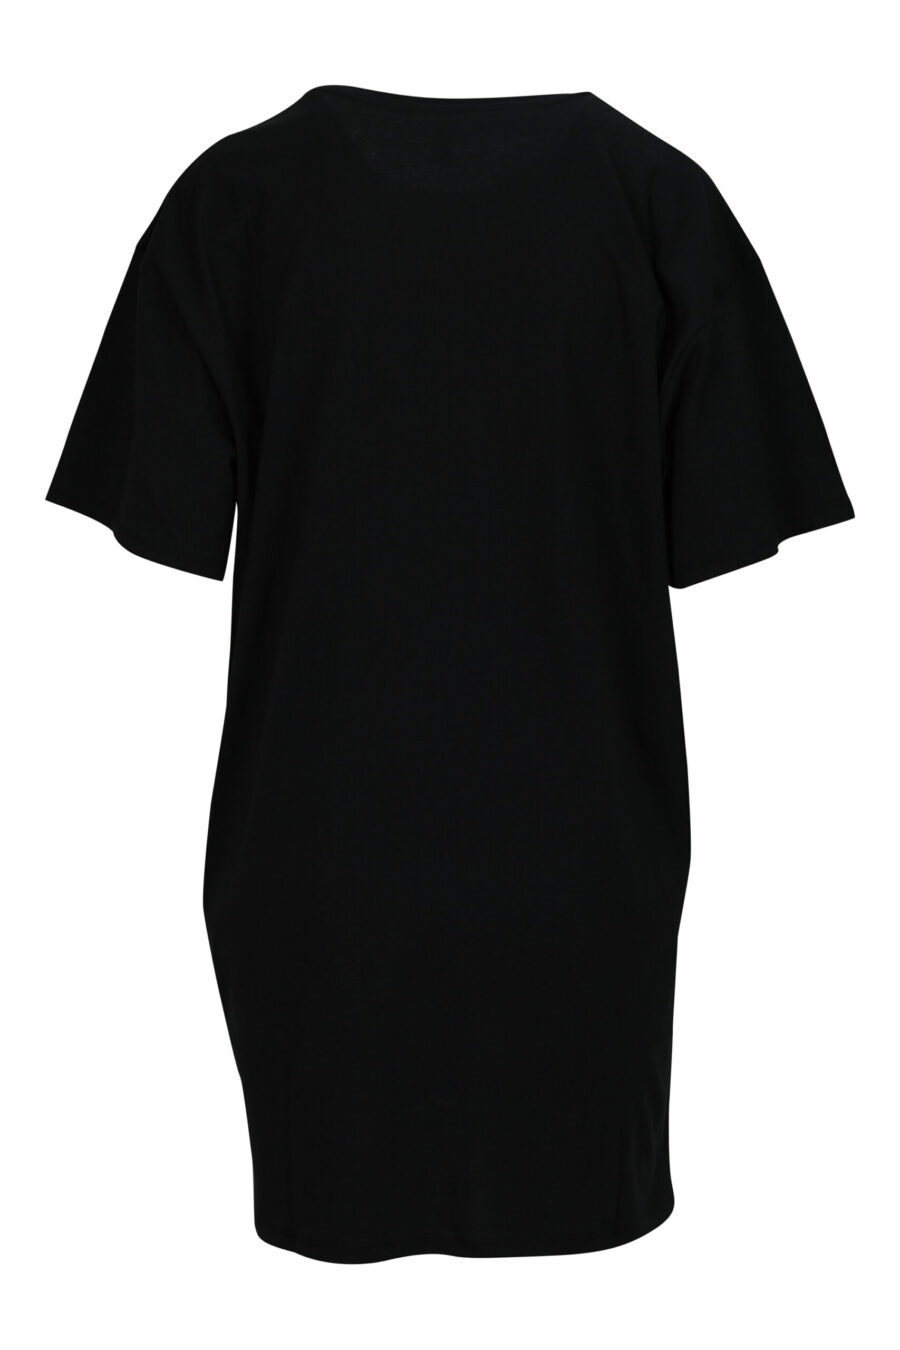 Black dress with gold lettering logo - 667113355863 1 scaled